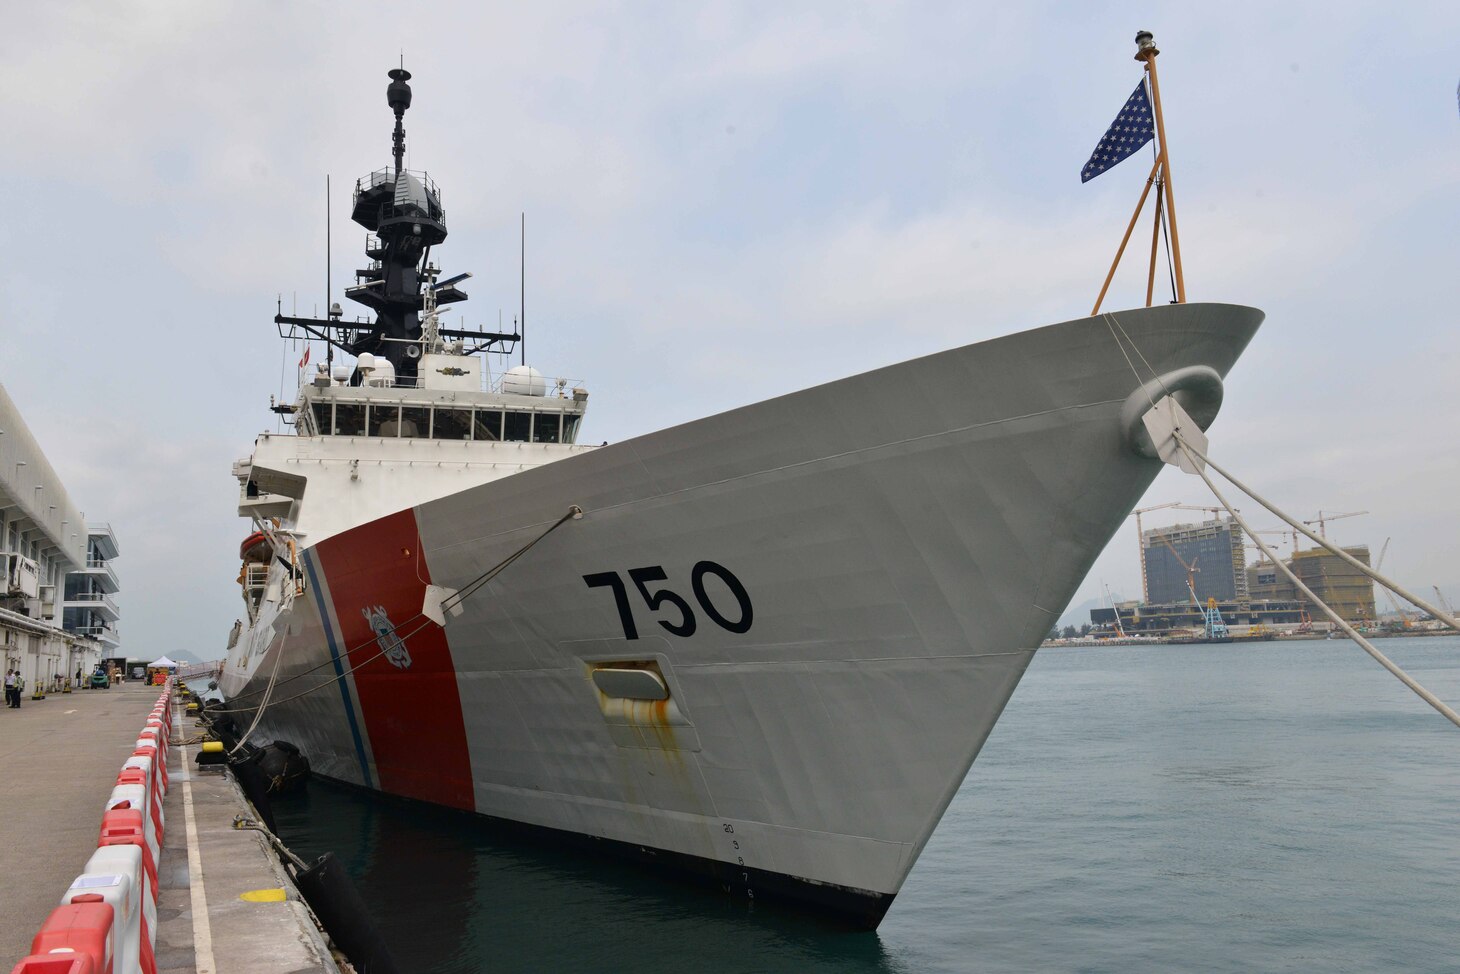 The U.S. Coast Guard Cutter Bertholf crew moors the cutter in Hong Kong during the cutter’s Western Pacific deployment under the tactical control of Commander, 7th Fleet, April 15, 2019. The U.S. Coast Guard’s deployment of resources to the region directly supports U.S. foreign policy and national security objectives as outlined by the President in the Indo-Pacific Strategy and the National Security Strategy.